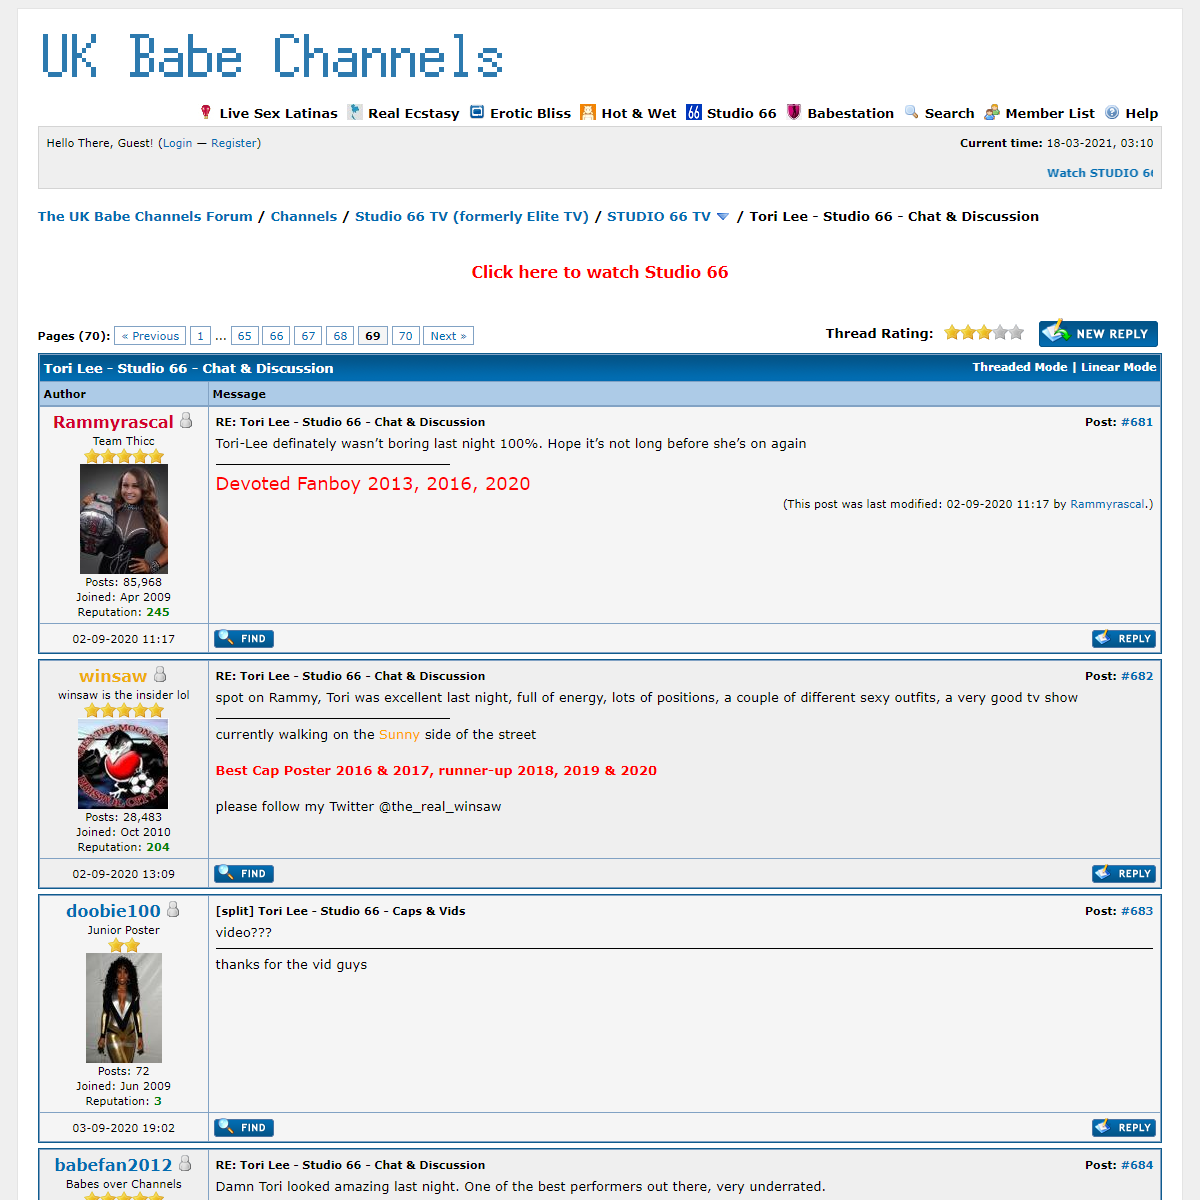 A complete backup of https://www.babeshows.co.uk/showthread.php?tid=56936&page=69